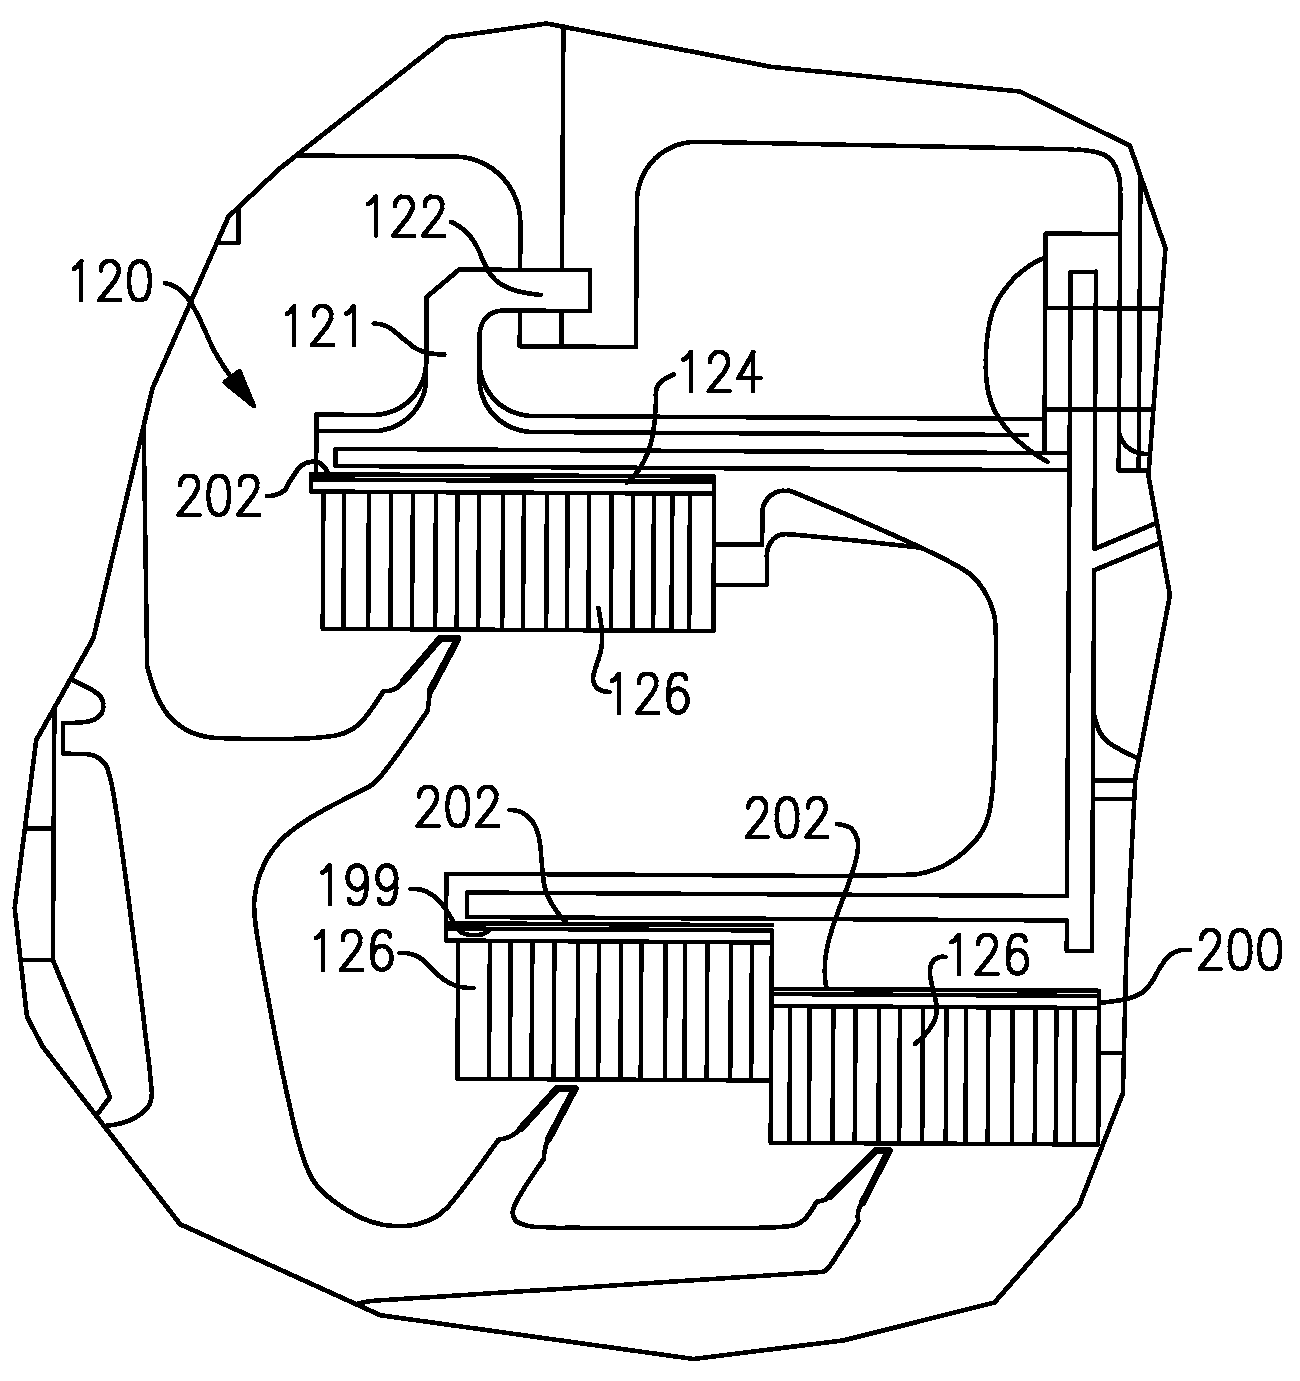 Gas turbine engine with integrated abradable seal and mount plate